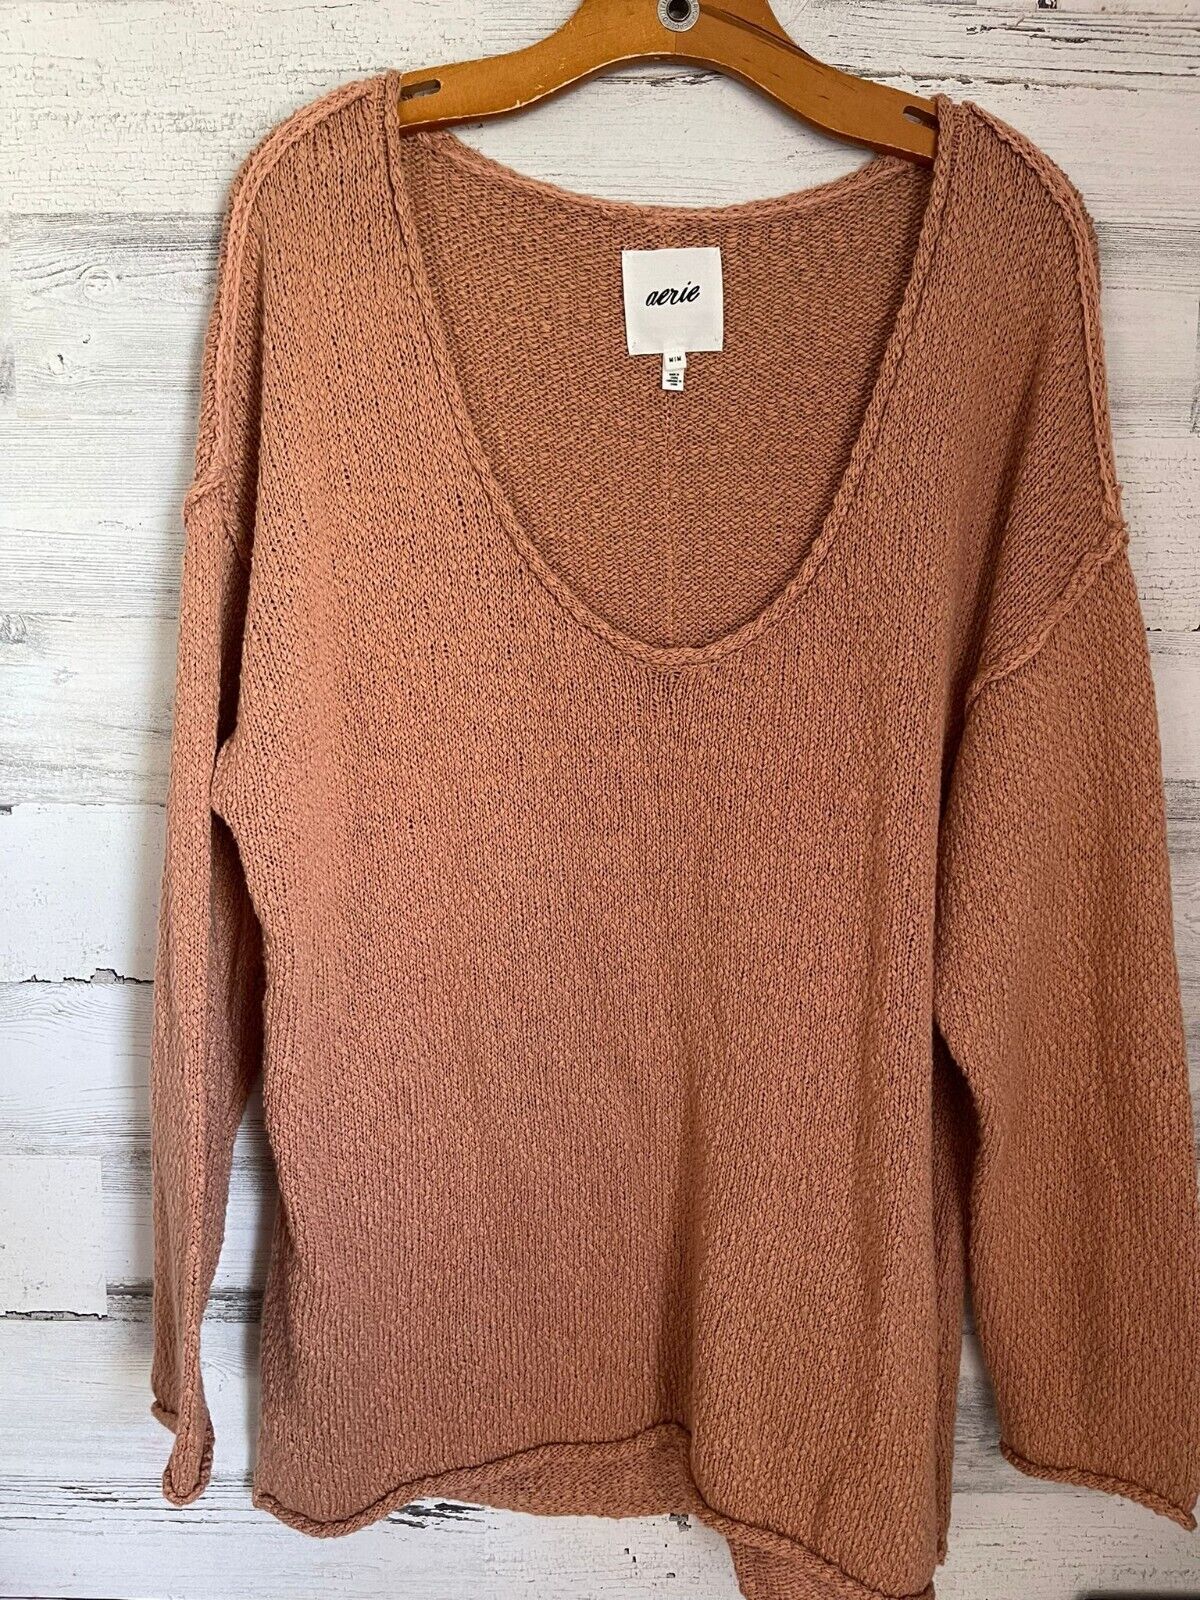 Primary image for Aerie Sweater Women's Size Medium Tan Knit Scoop Neck Long Sleeve Pullover Peach